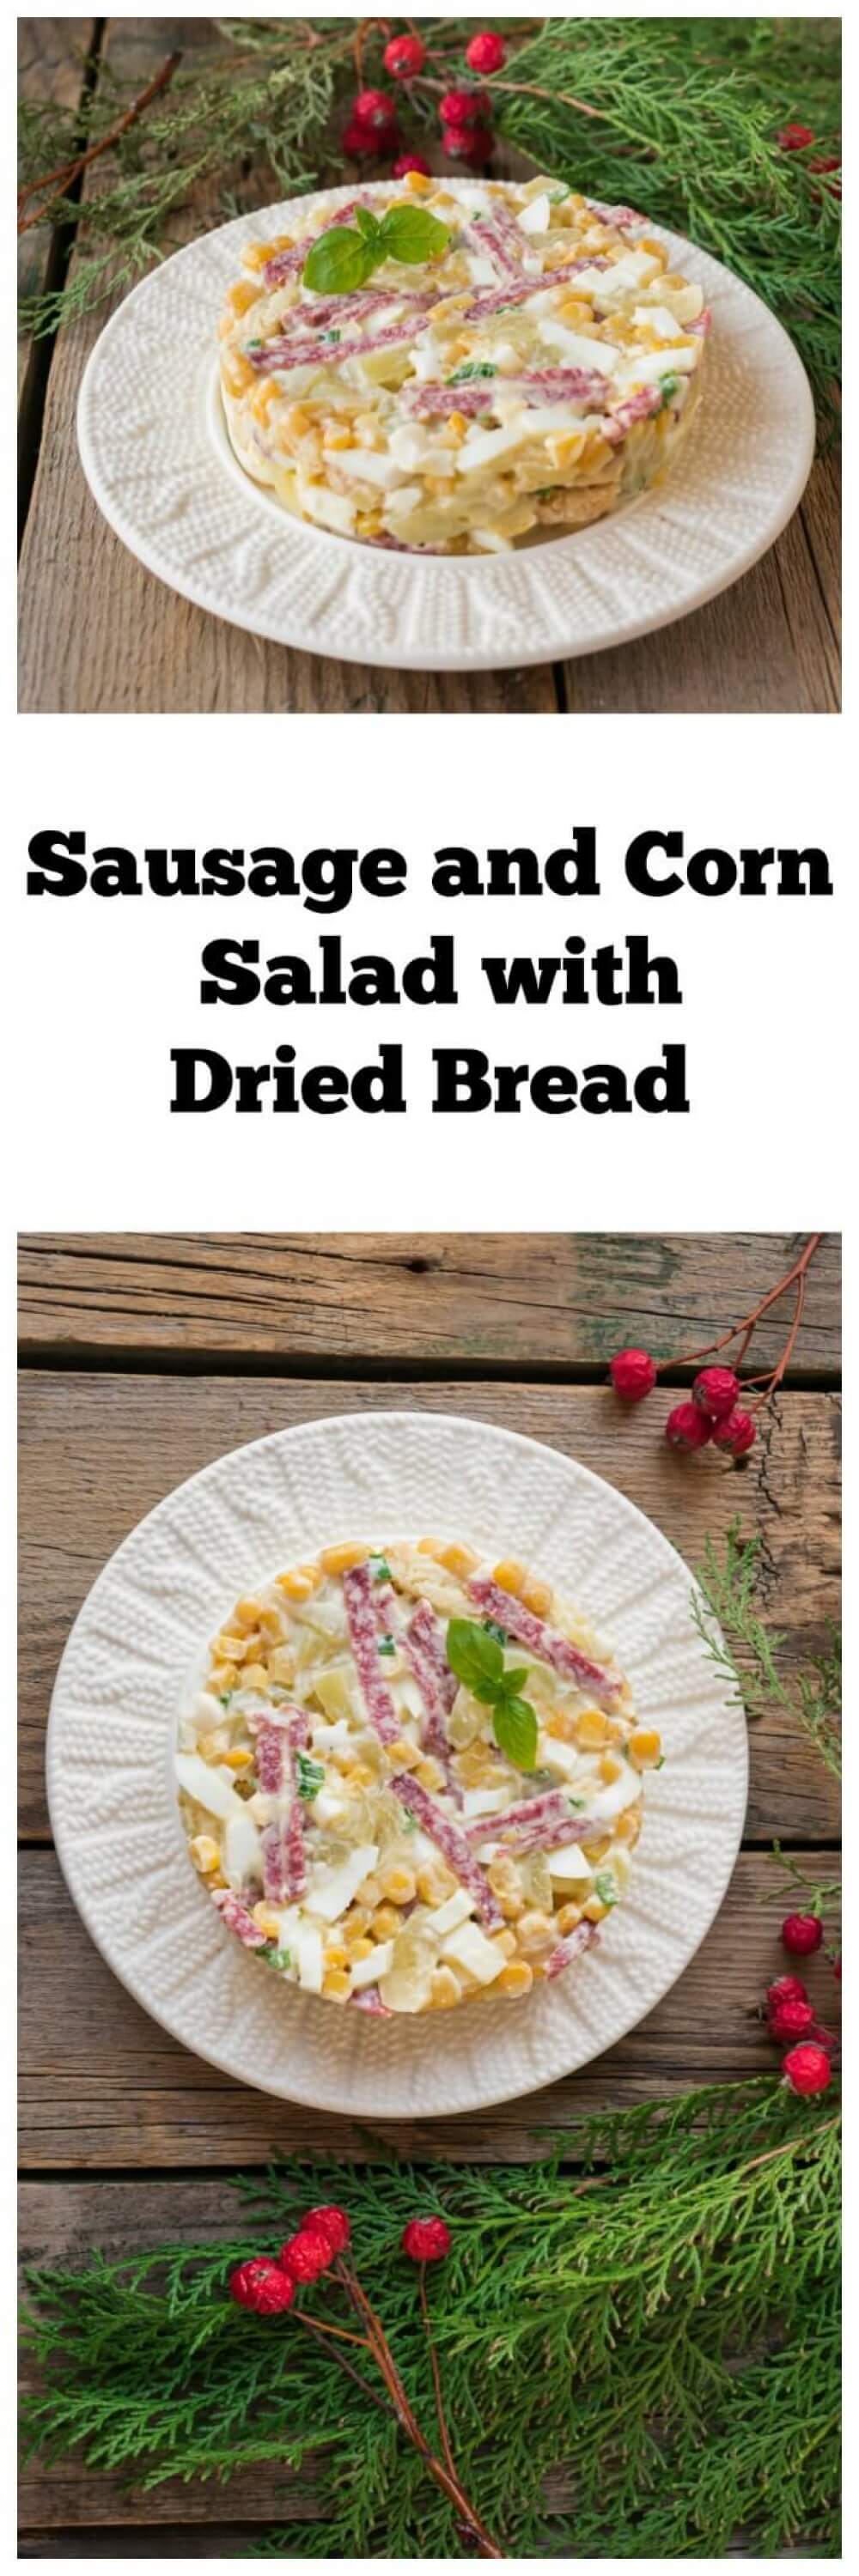 Sausage and Corn Salad with Dried Bread